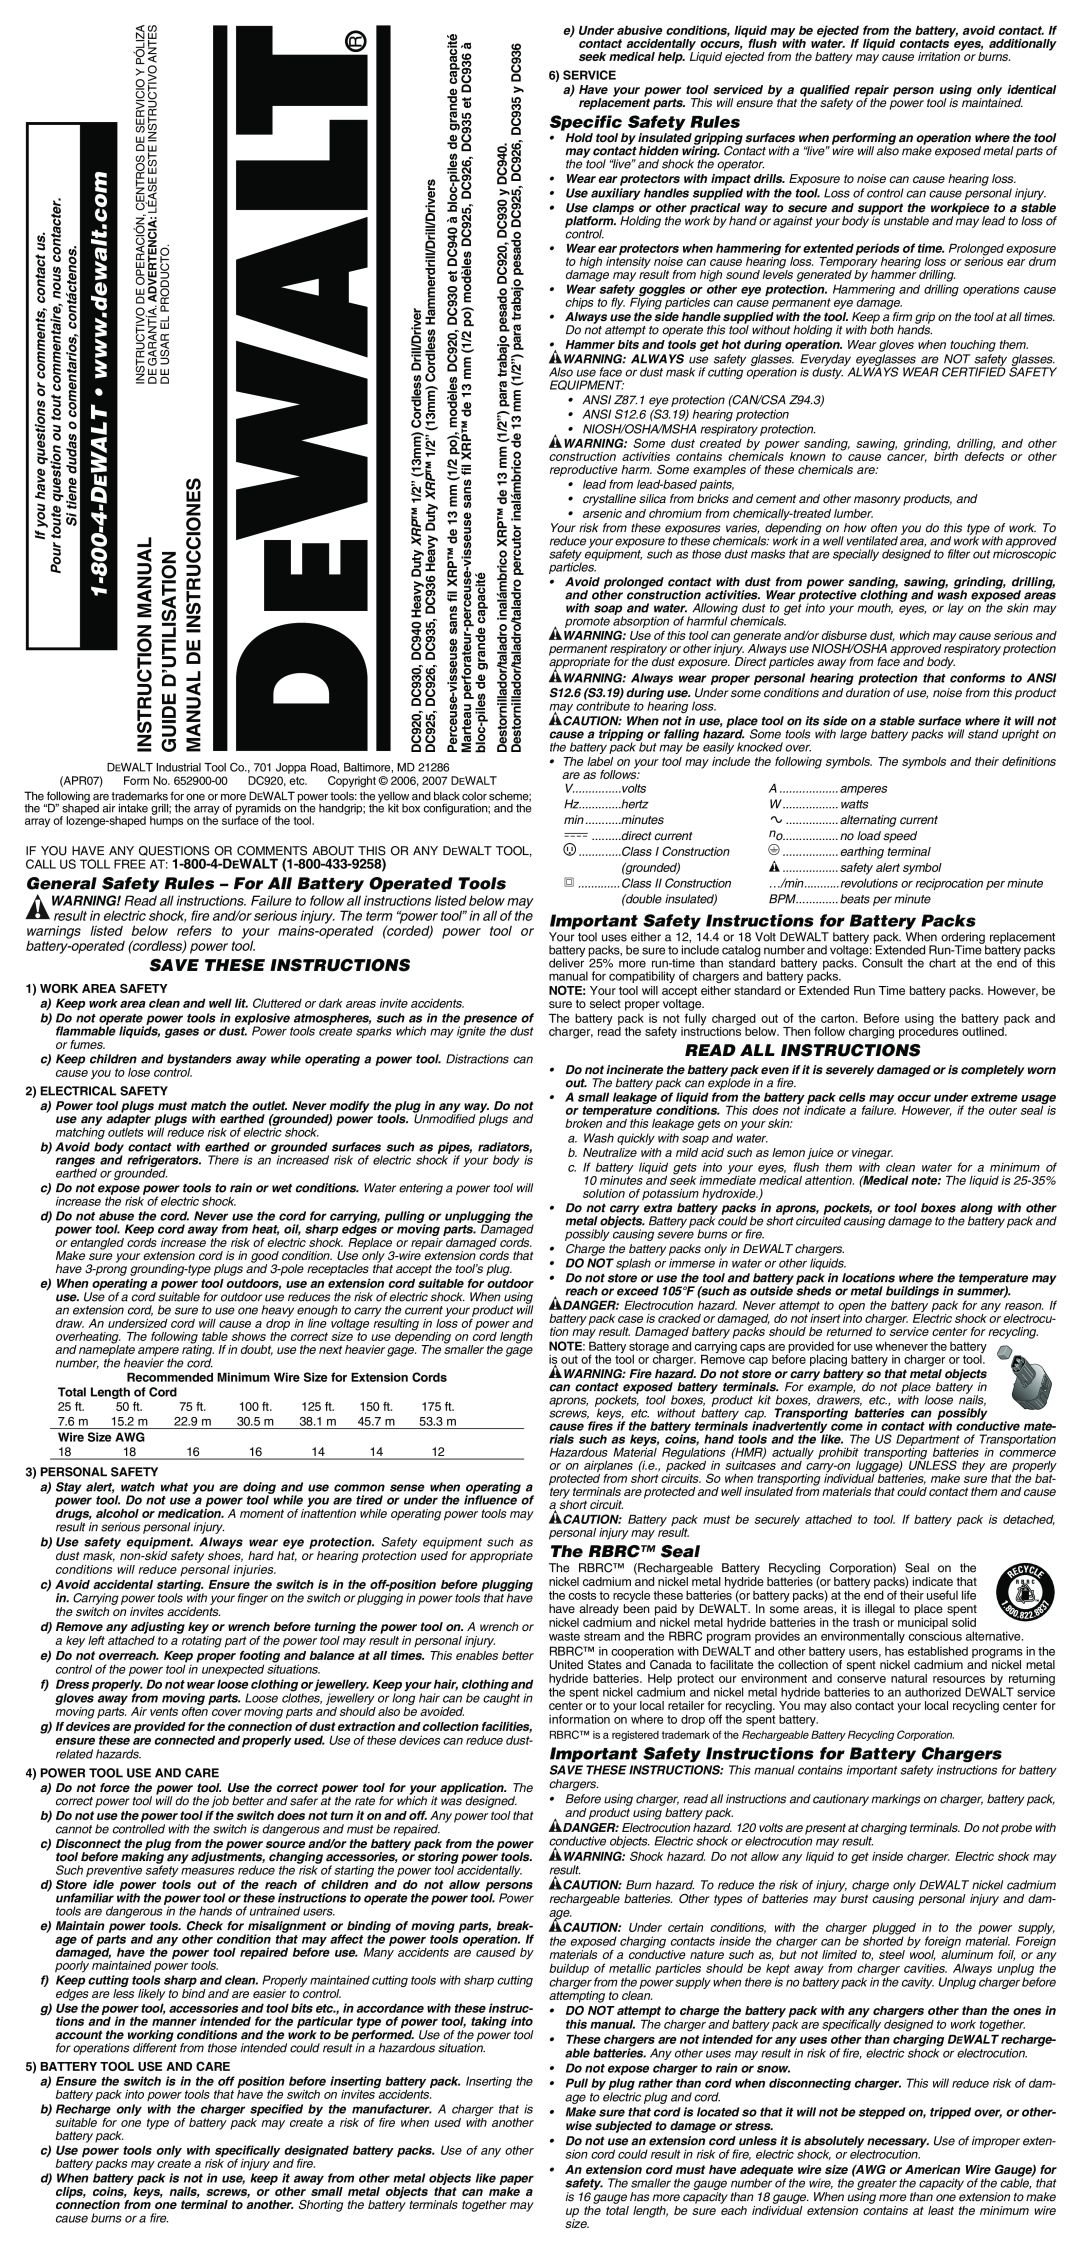 DeWalt DC920, DC936 instruction manual General Safety Rules - For All Battery Operated Tools, Save These Instructions 